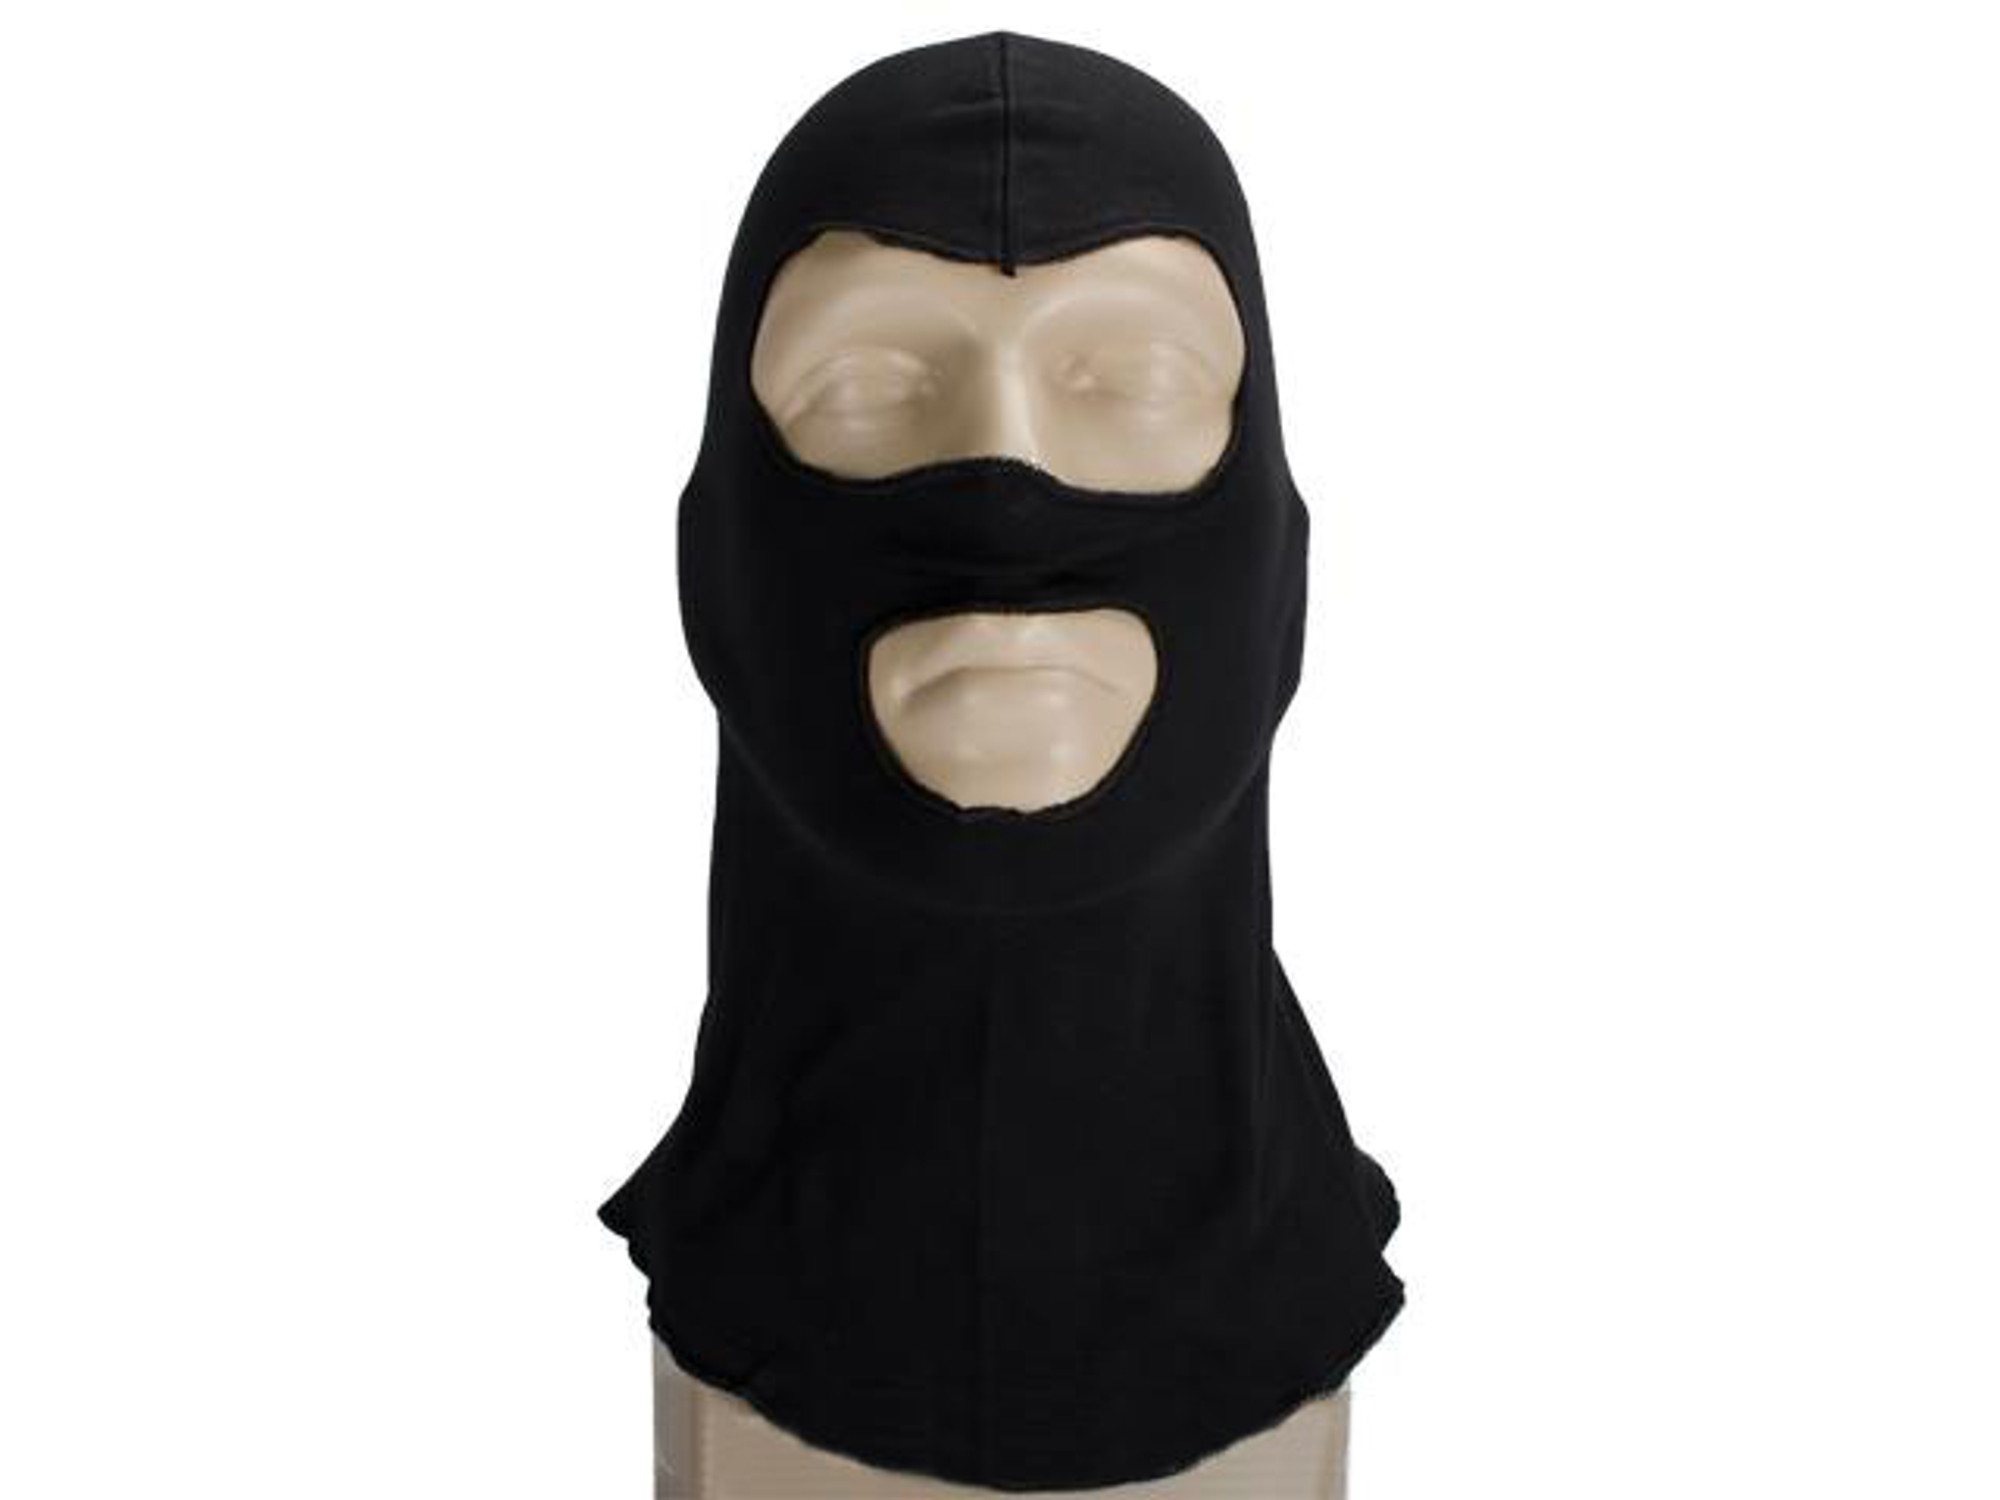 Matrix Odyssey SWAT Hood II for Airsoft and Tactical Simulations Black